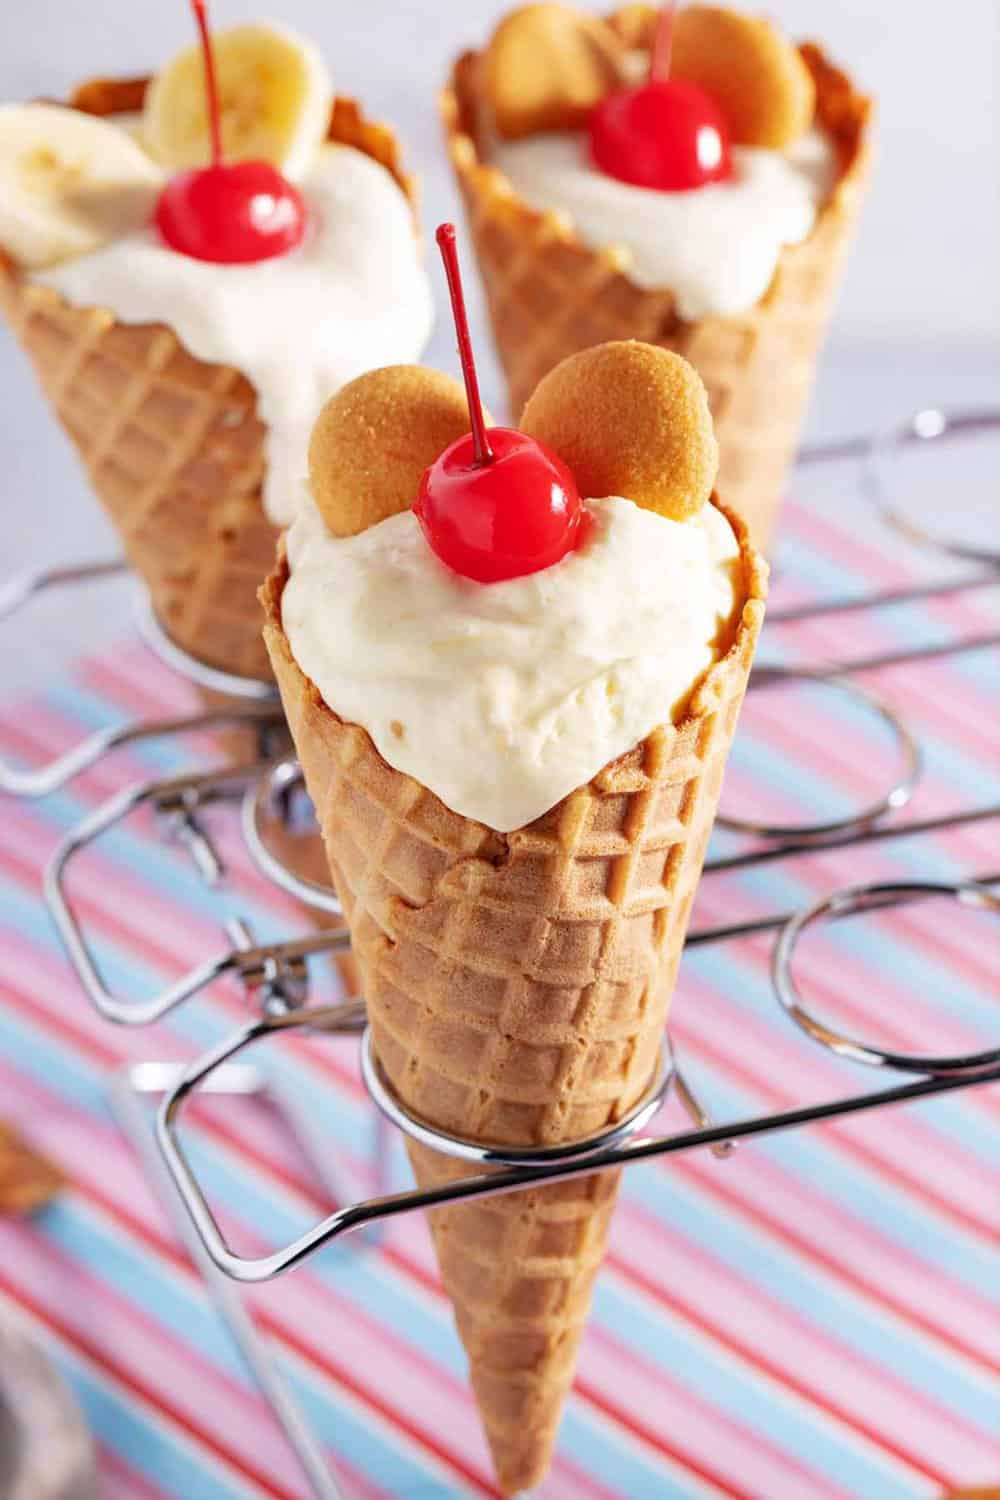 Serving banana pudding in a waffle cone.